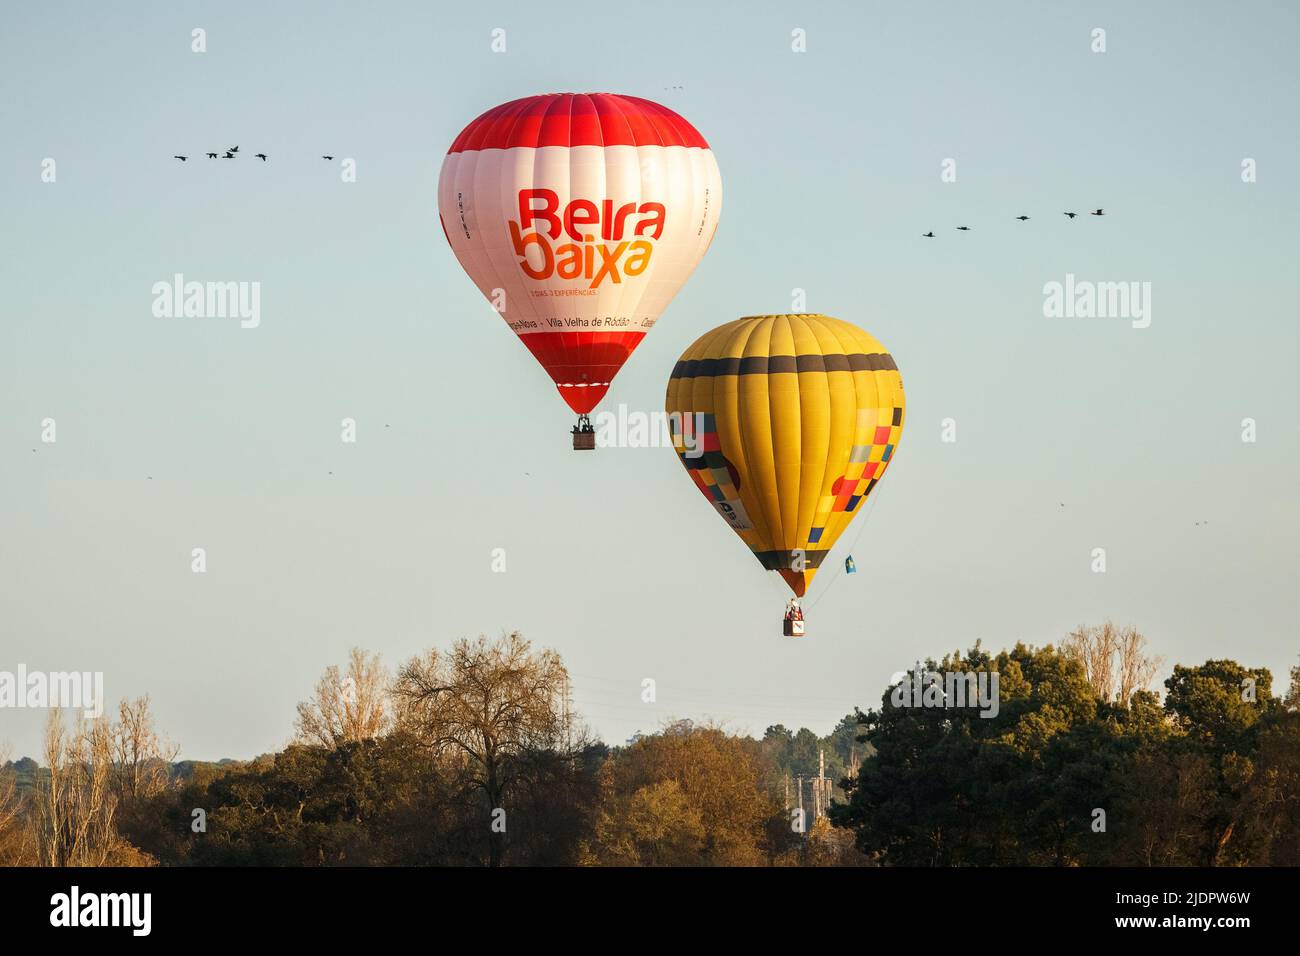 Coruche, Portugal - November 13, 2021: Two hot air balloons flying over trees with a group of birds on either side of the balloons in Coruche, Portuga Stock Photo